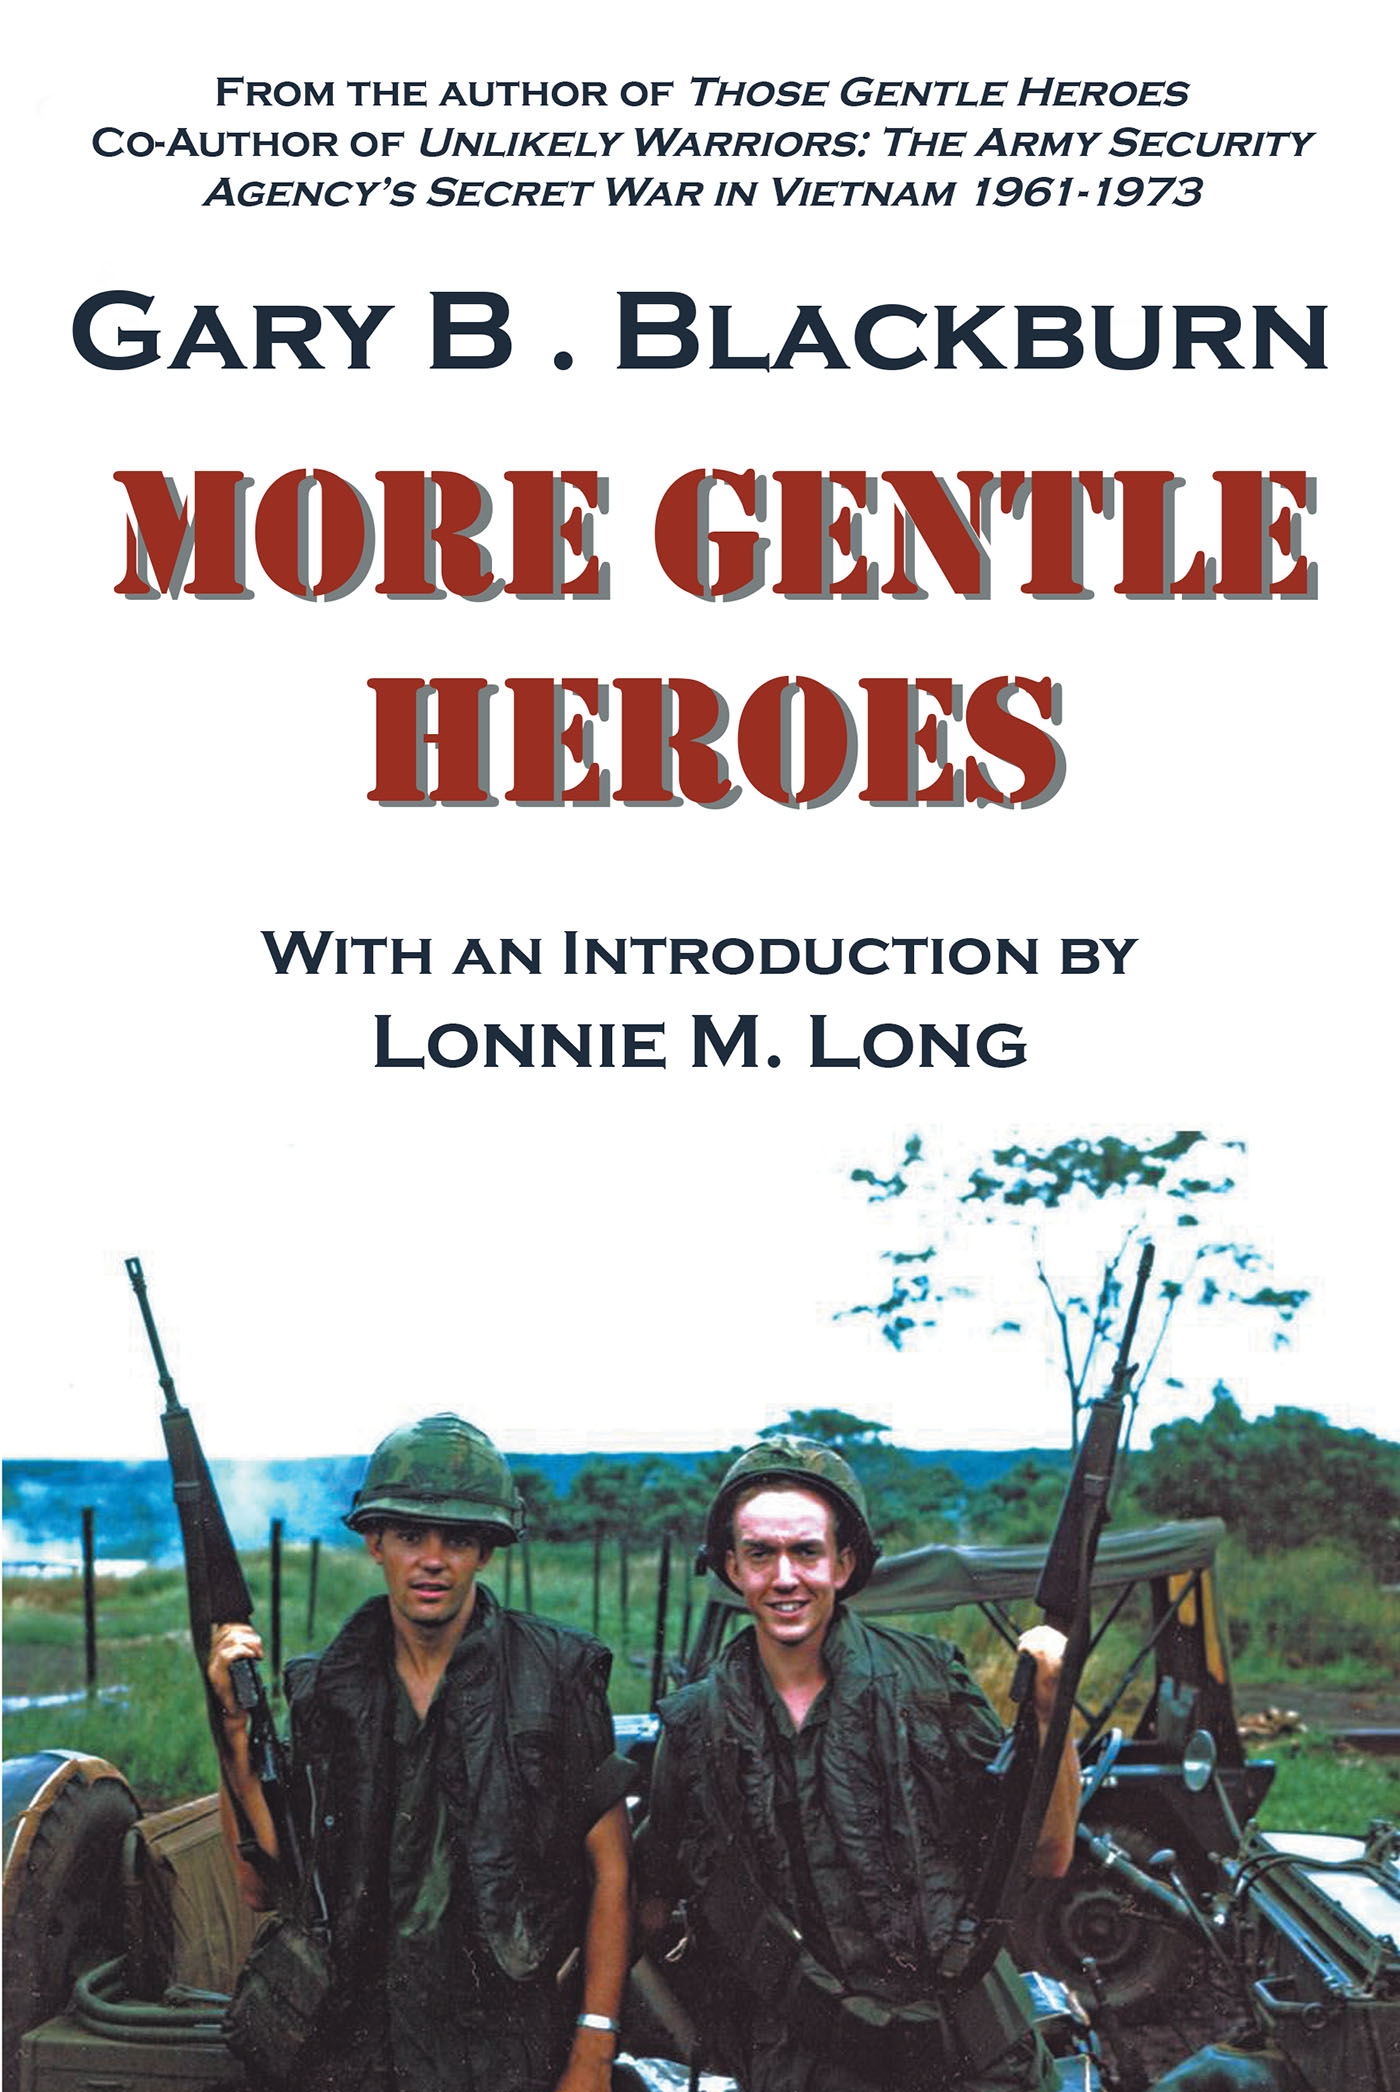 Author Gary B. Blackburn’s New Book, "More Gentle Heroes," is a Collection of Stories That Follows the True Heroism and Courage of Real Men & Women Who Served in Vietnam